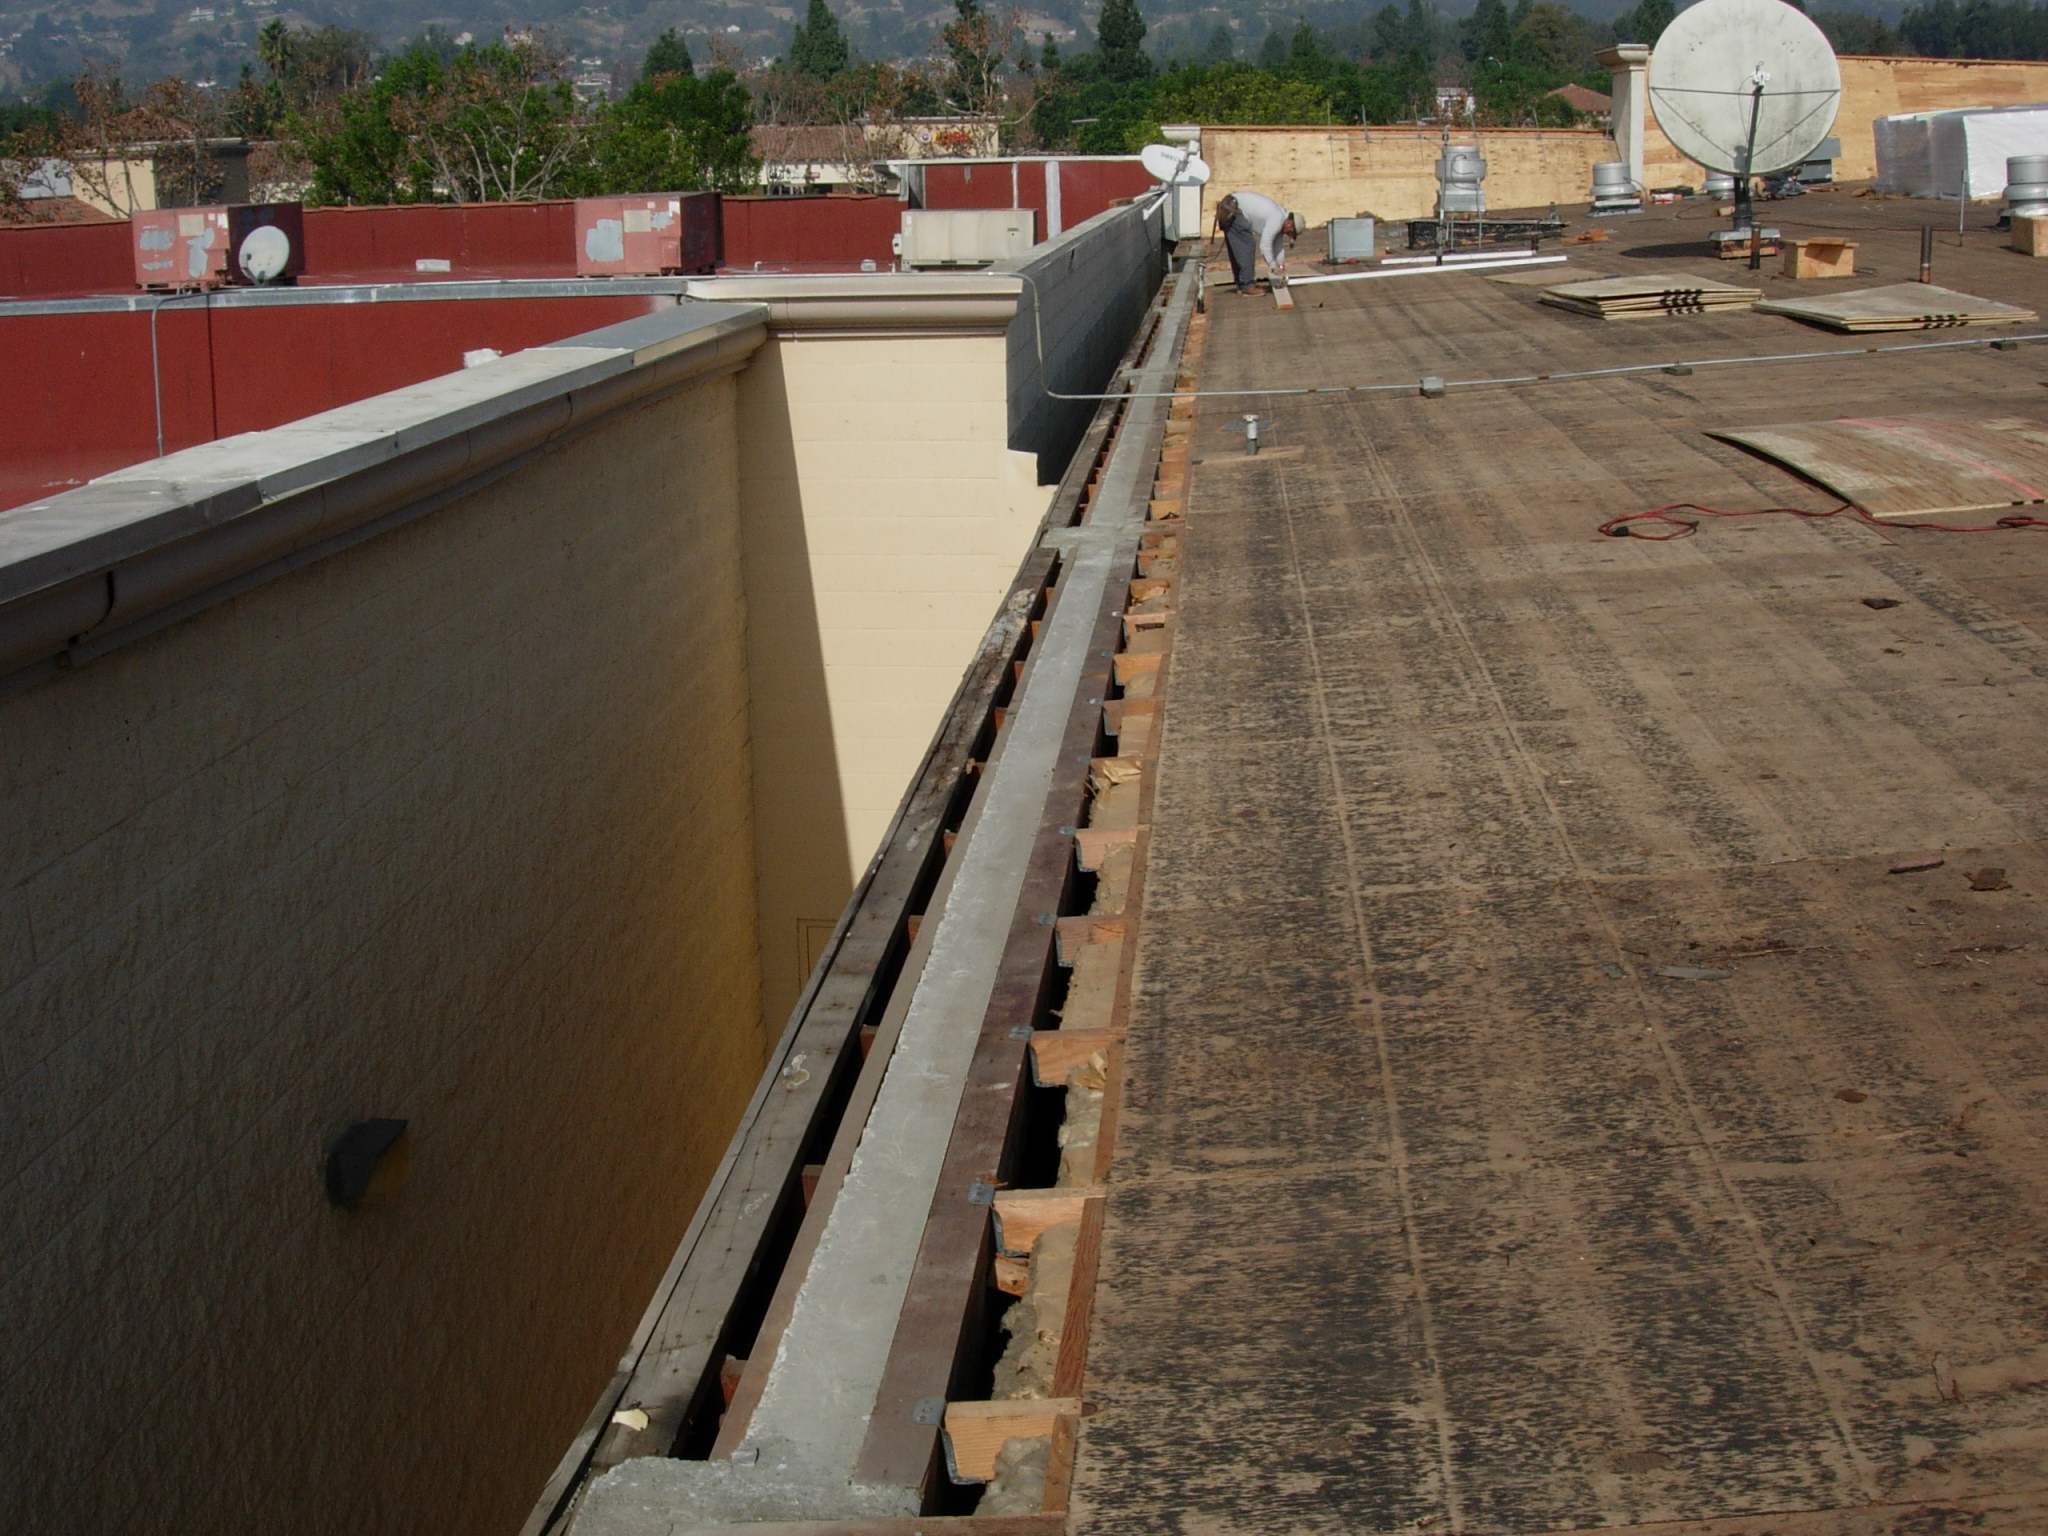 Gutter_replacement | FC and Sons Roofing Protfolio | Commercial and Industrial Roofing in California | Commercial and Industrial Roofing in Nevada | Commercial and Industrial Roofing in Arizona